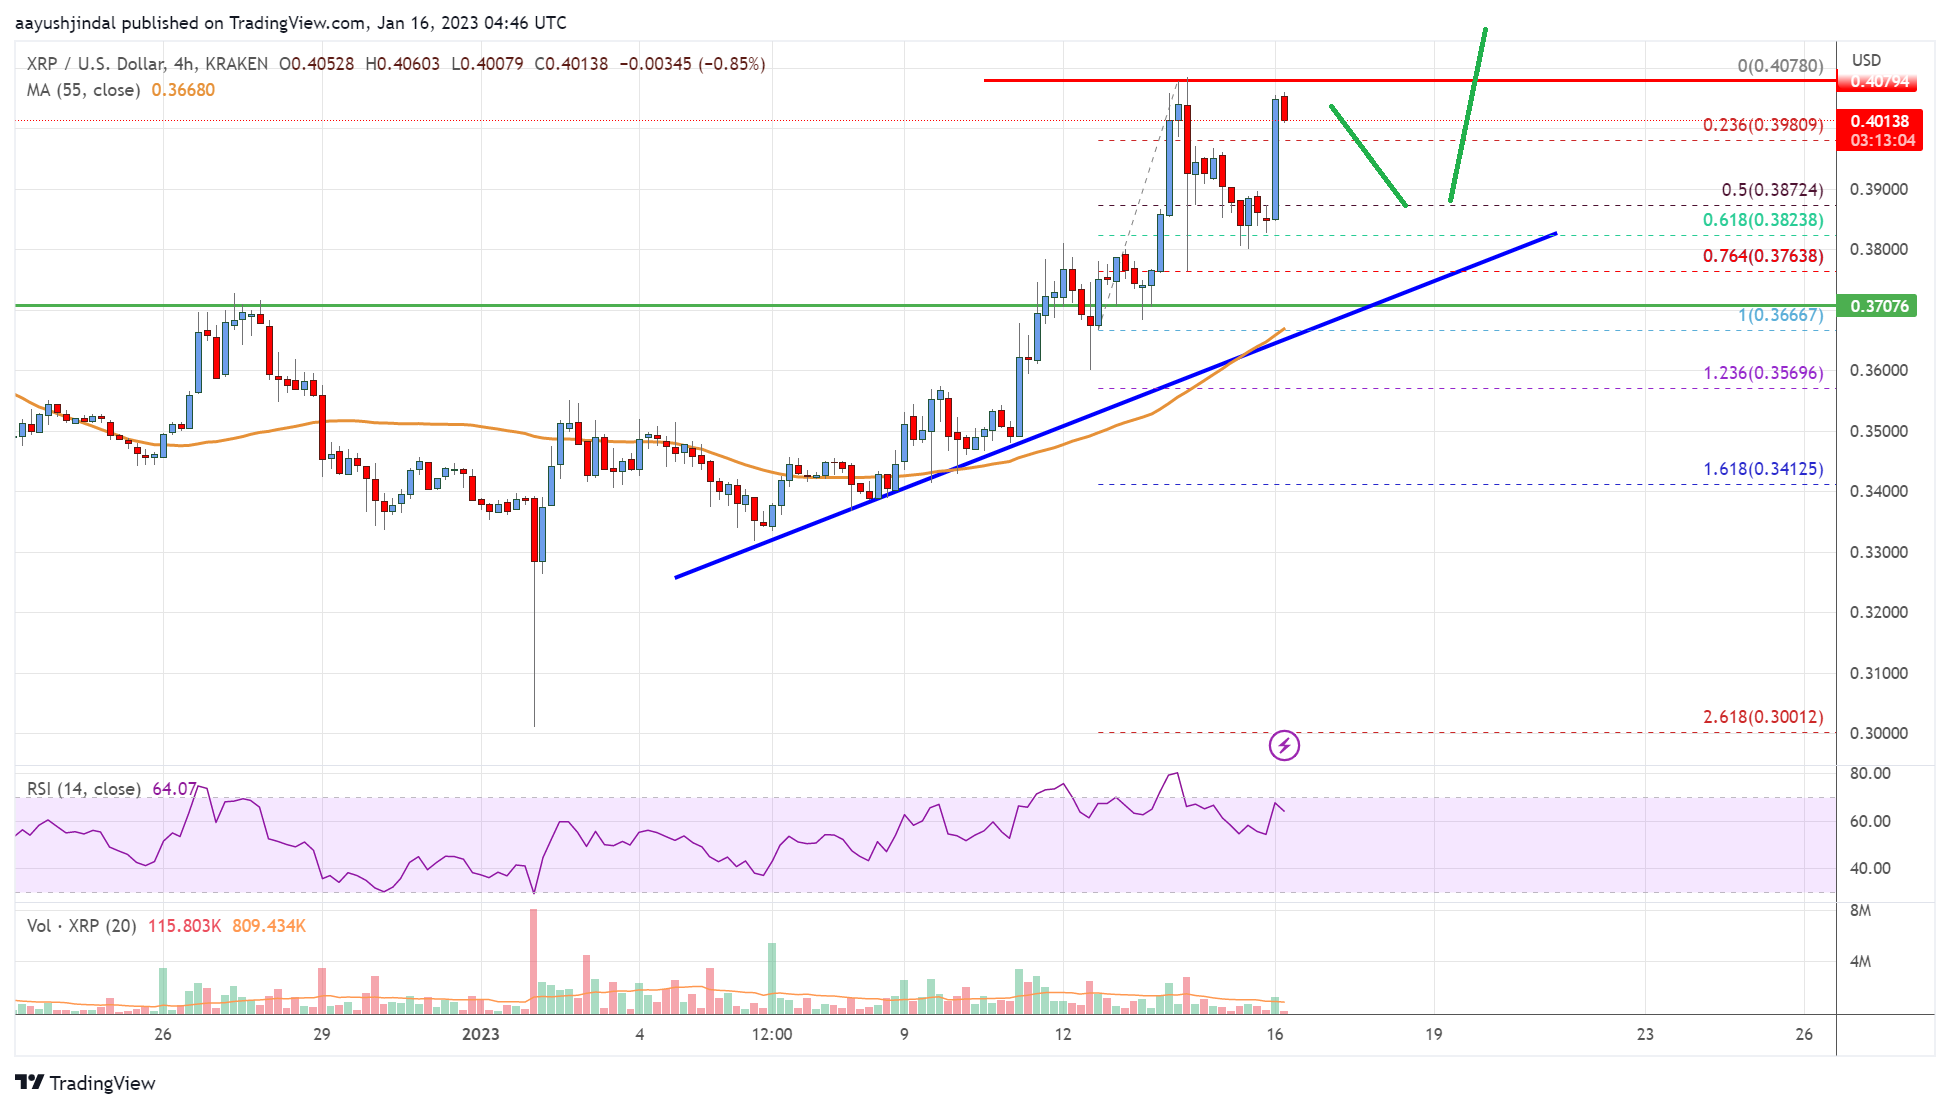 Ripple Price Analysis: Uptrend In Place Above $0.40